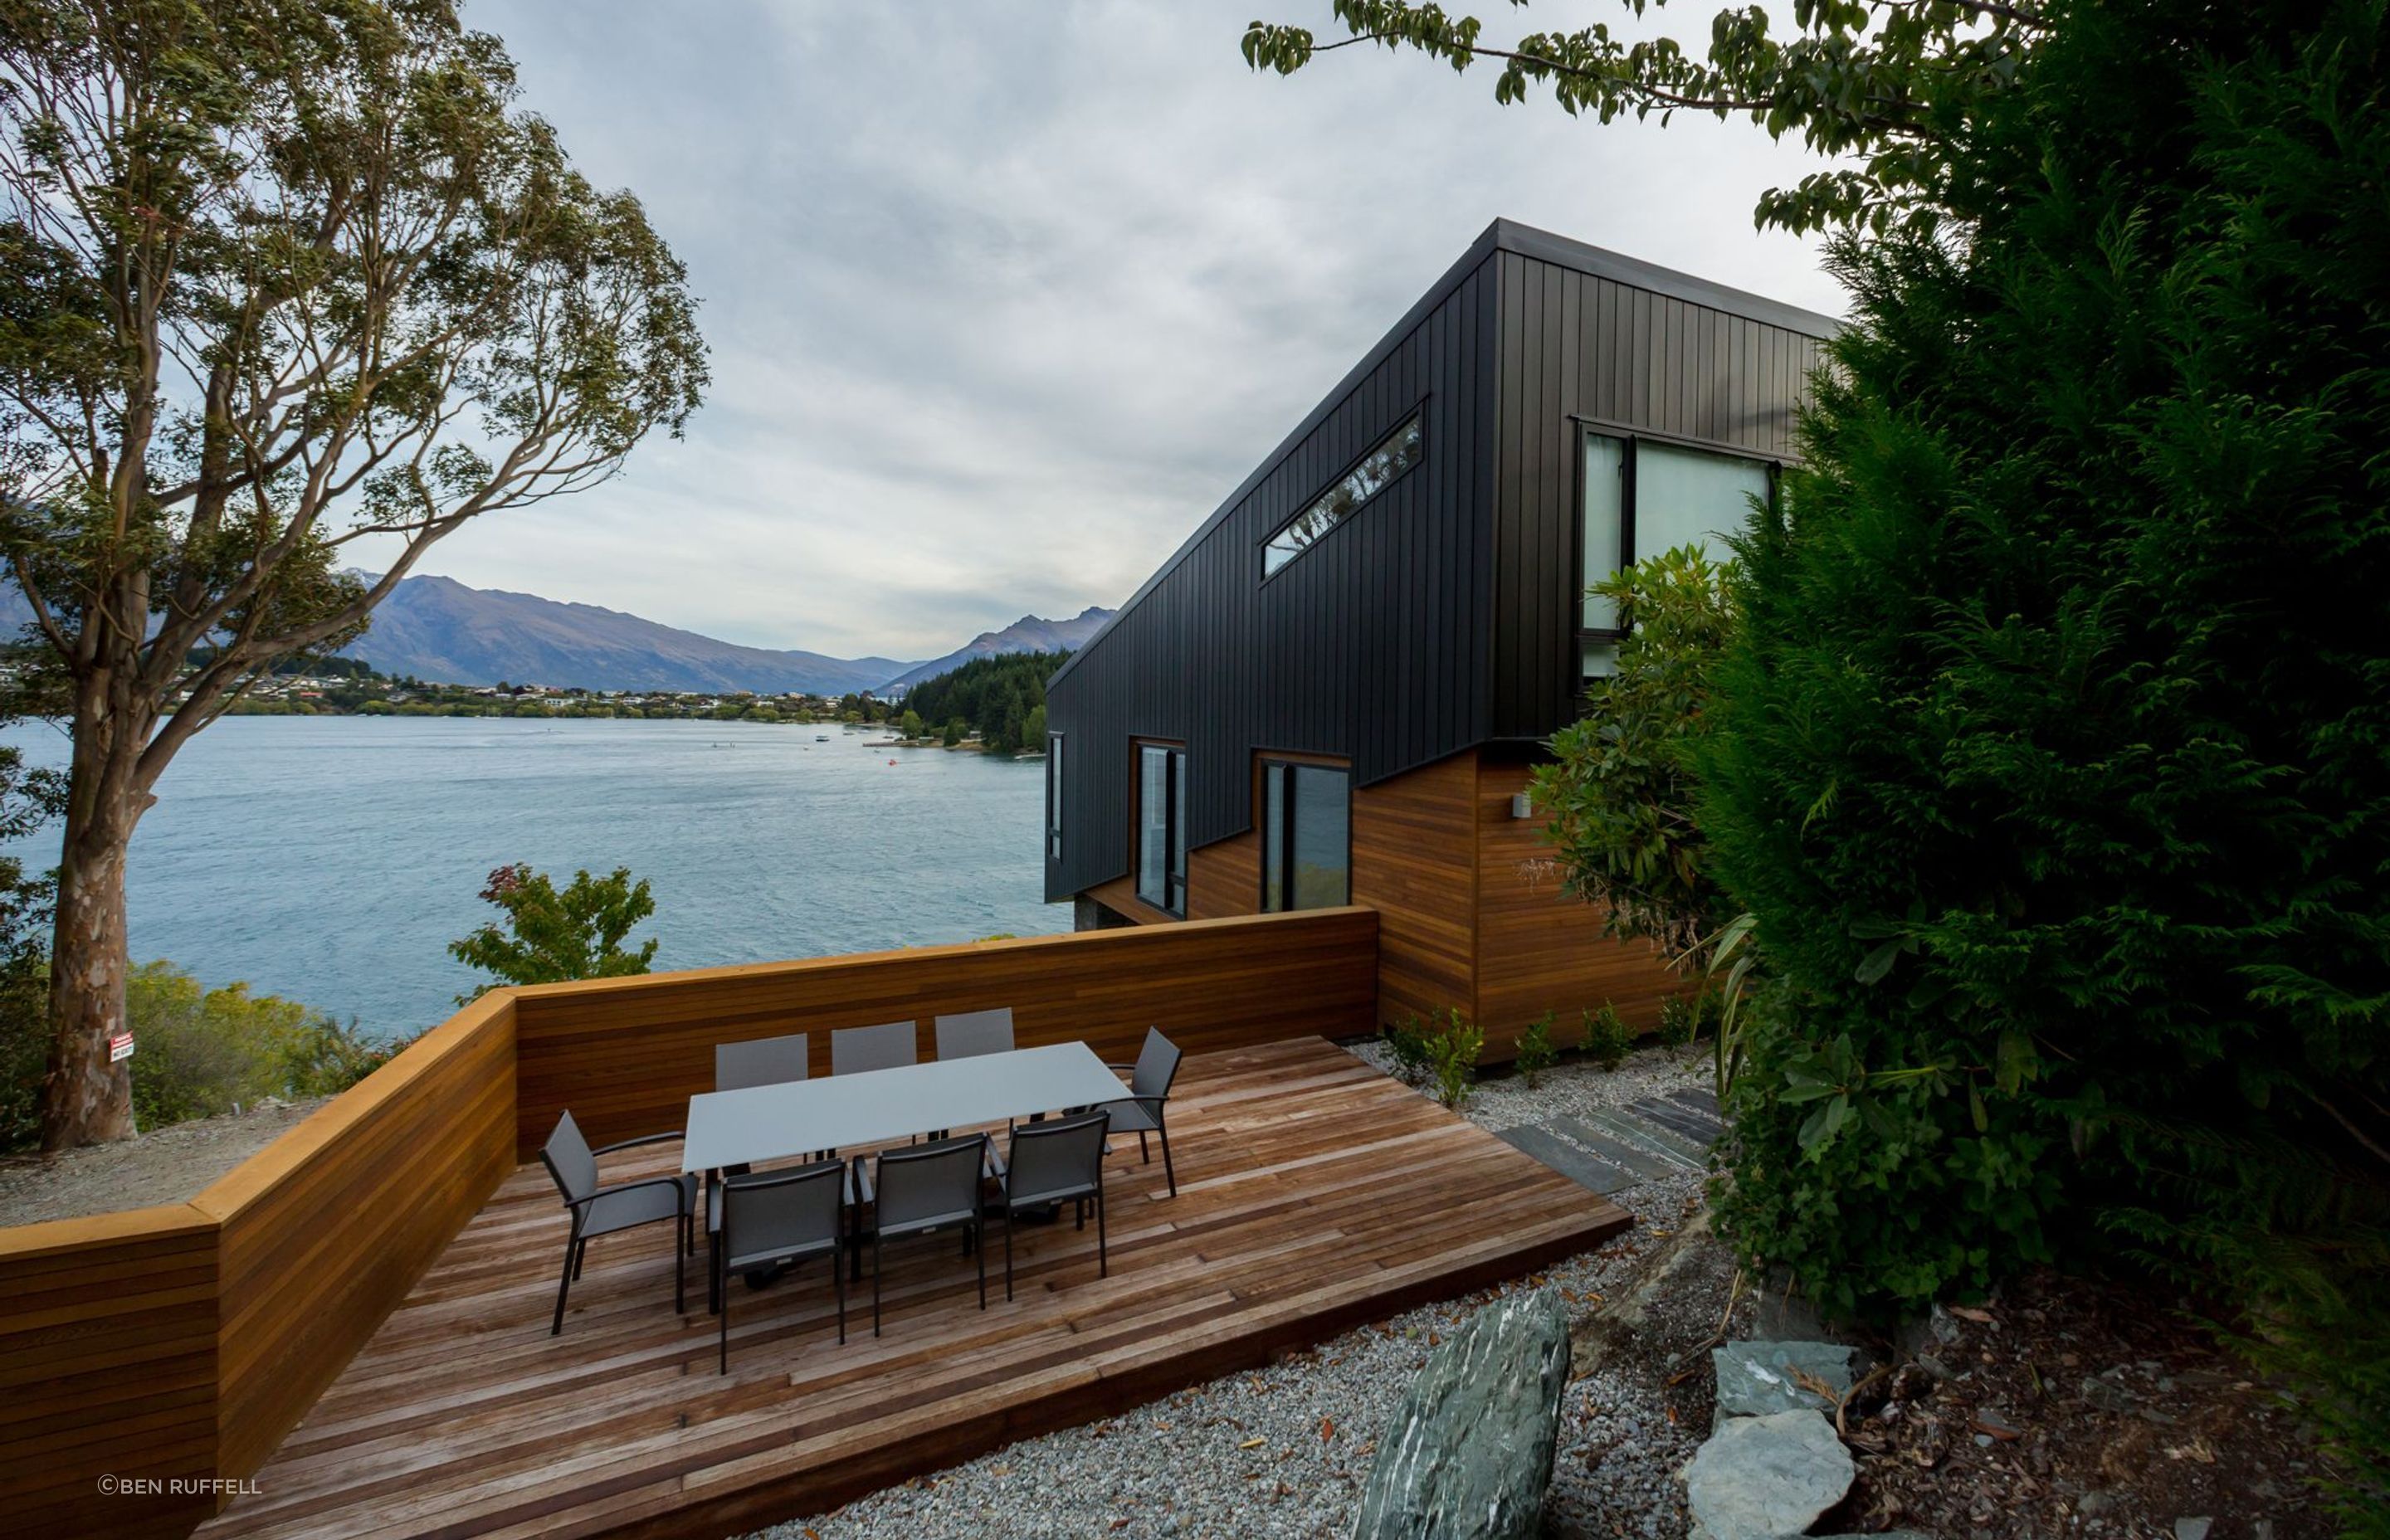 The rear terrace also features enviable views across the lake.